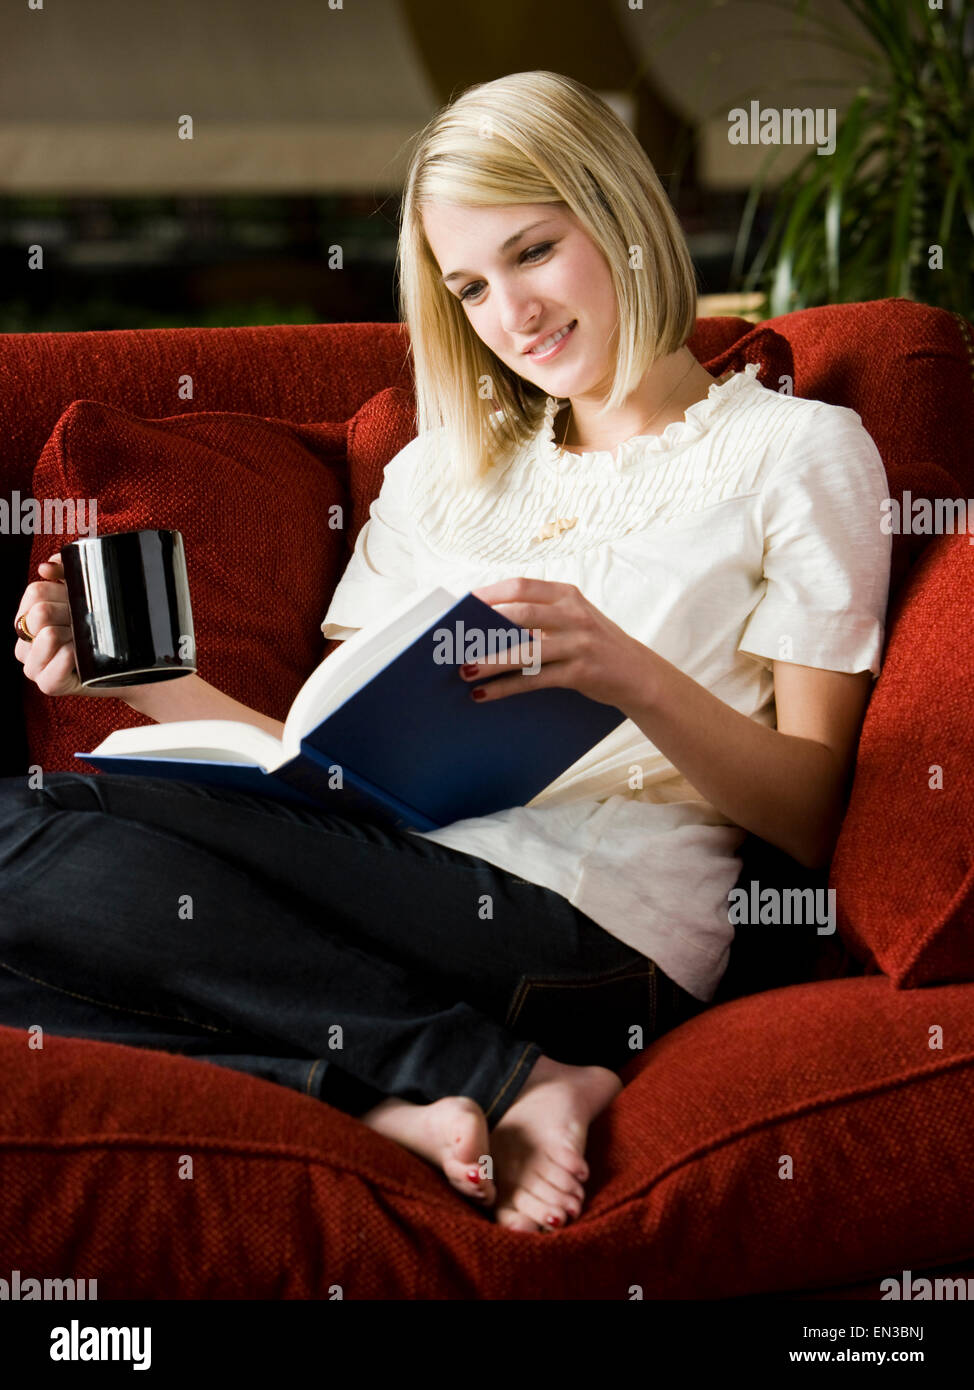 woman reading on the couch Stock Photo